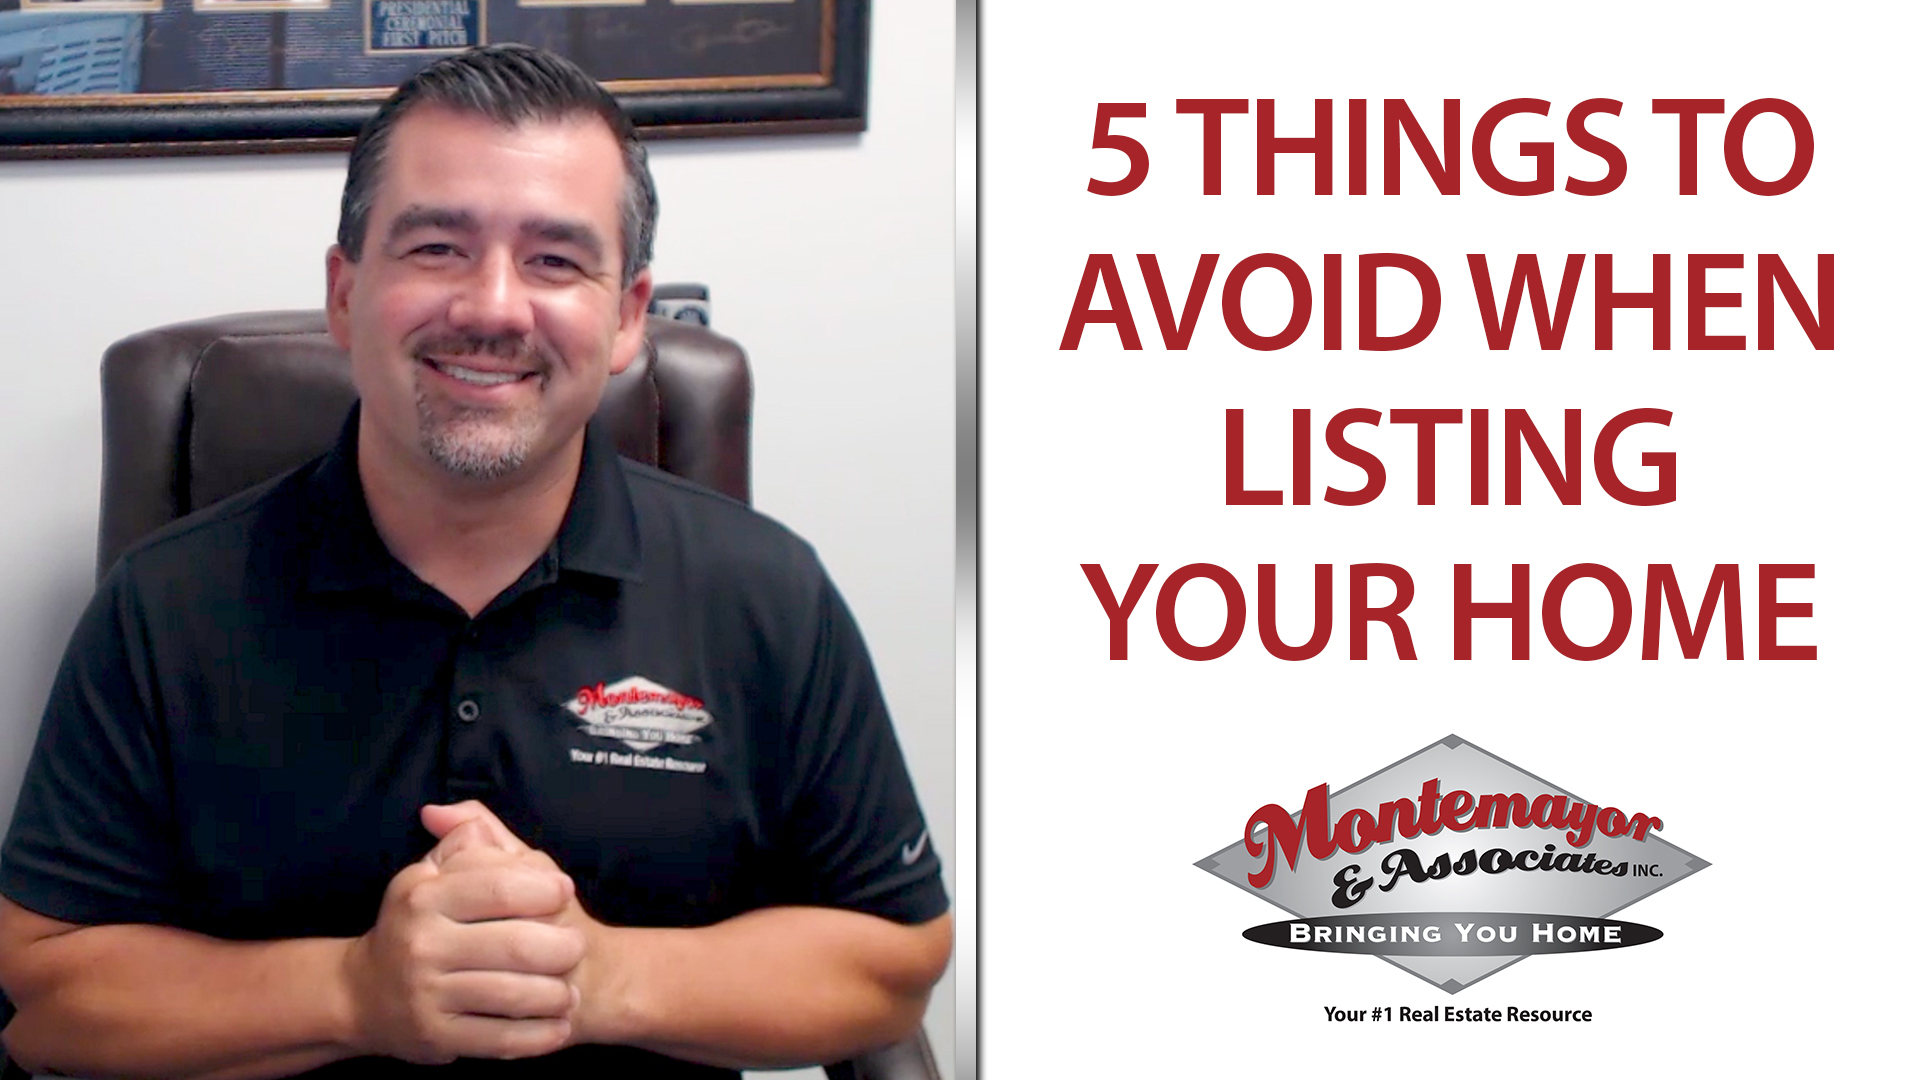 What Should You Avoid Doing If You’re Listing Your Home?